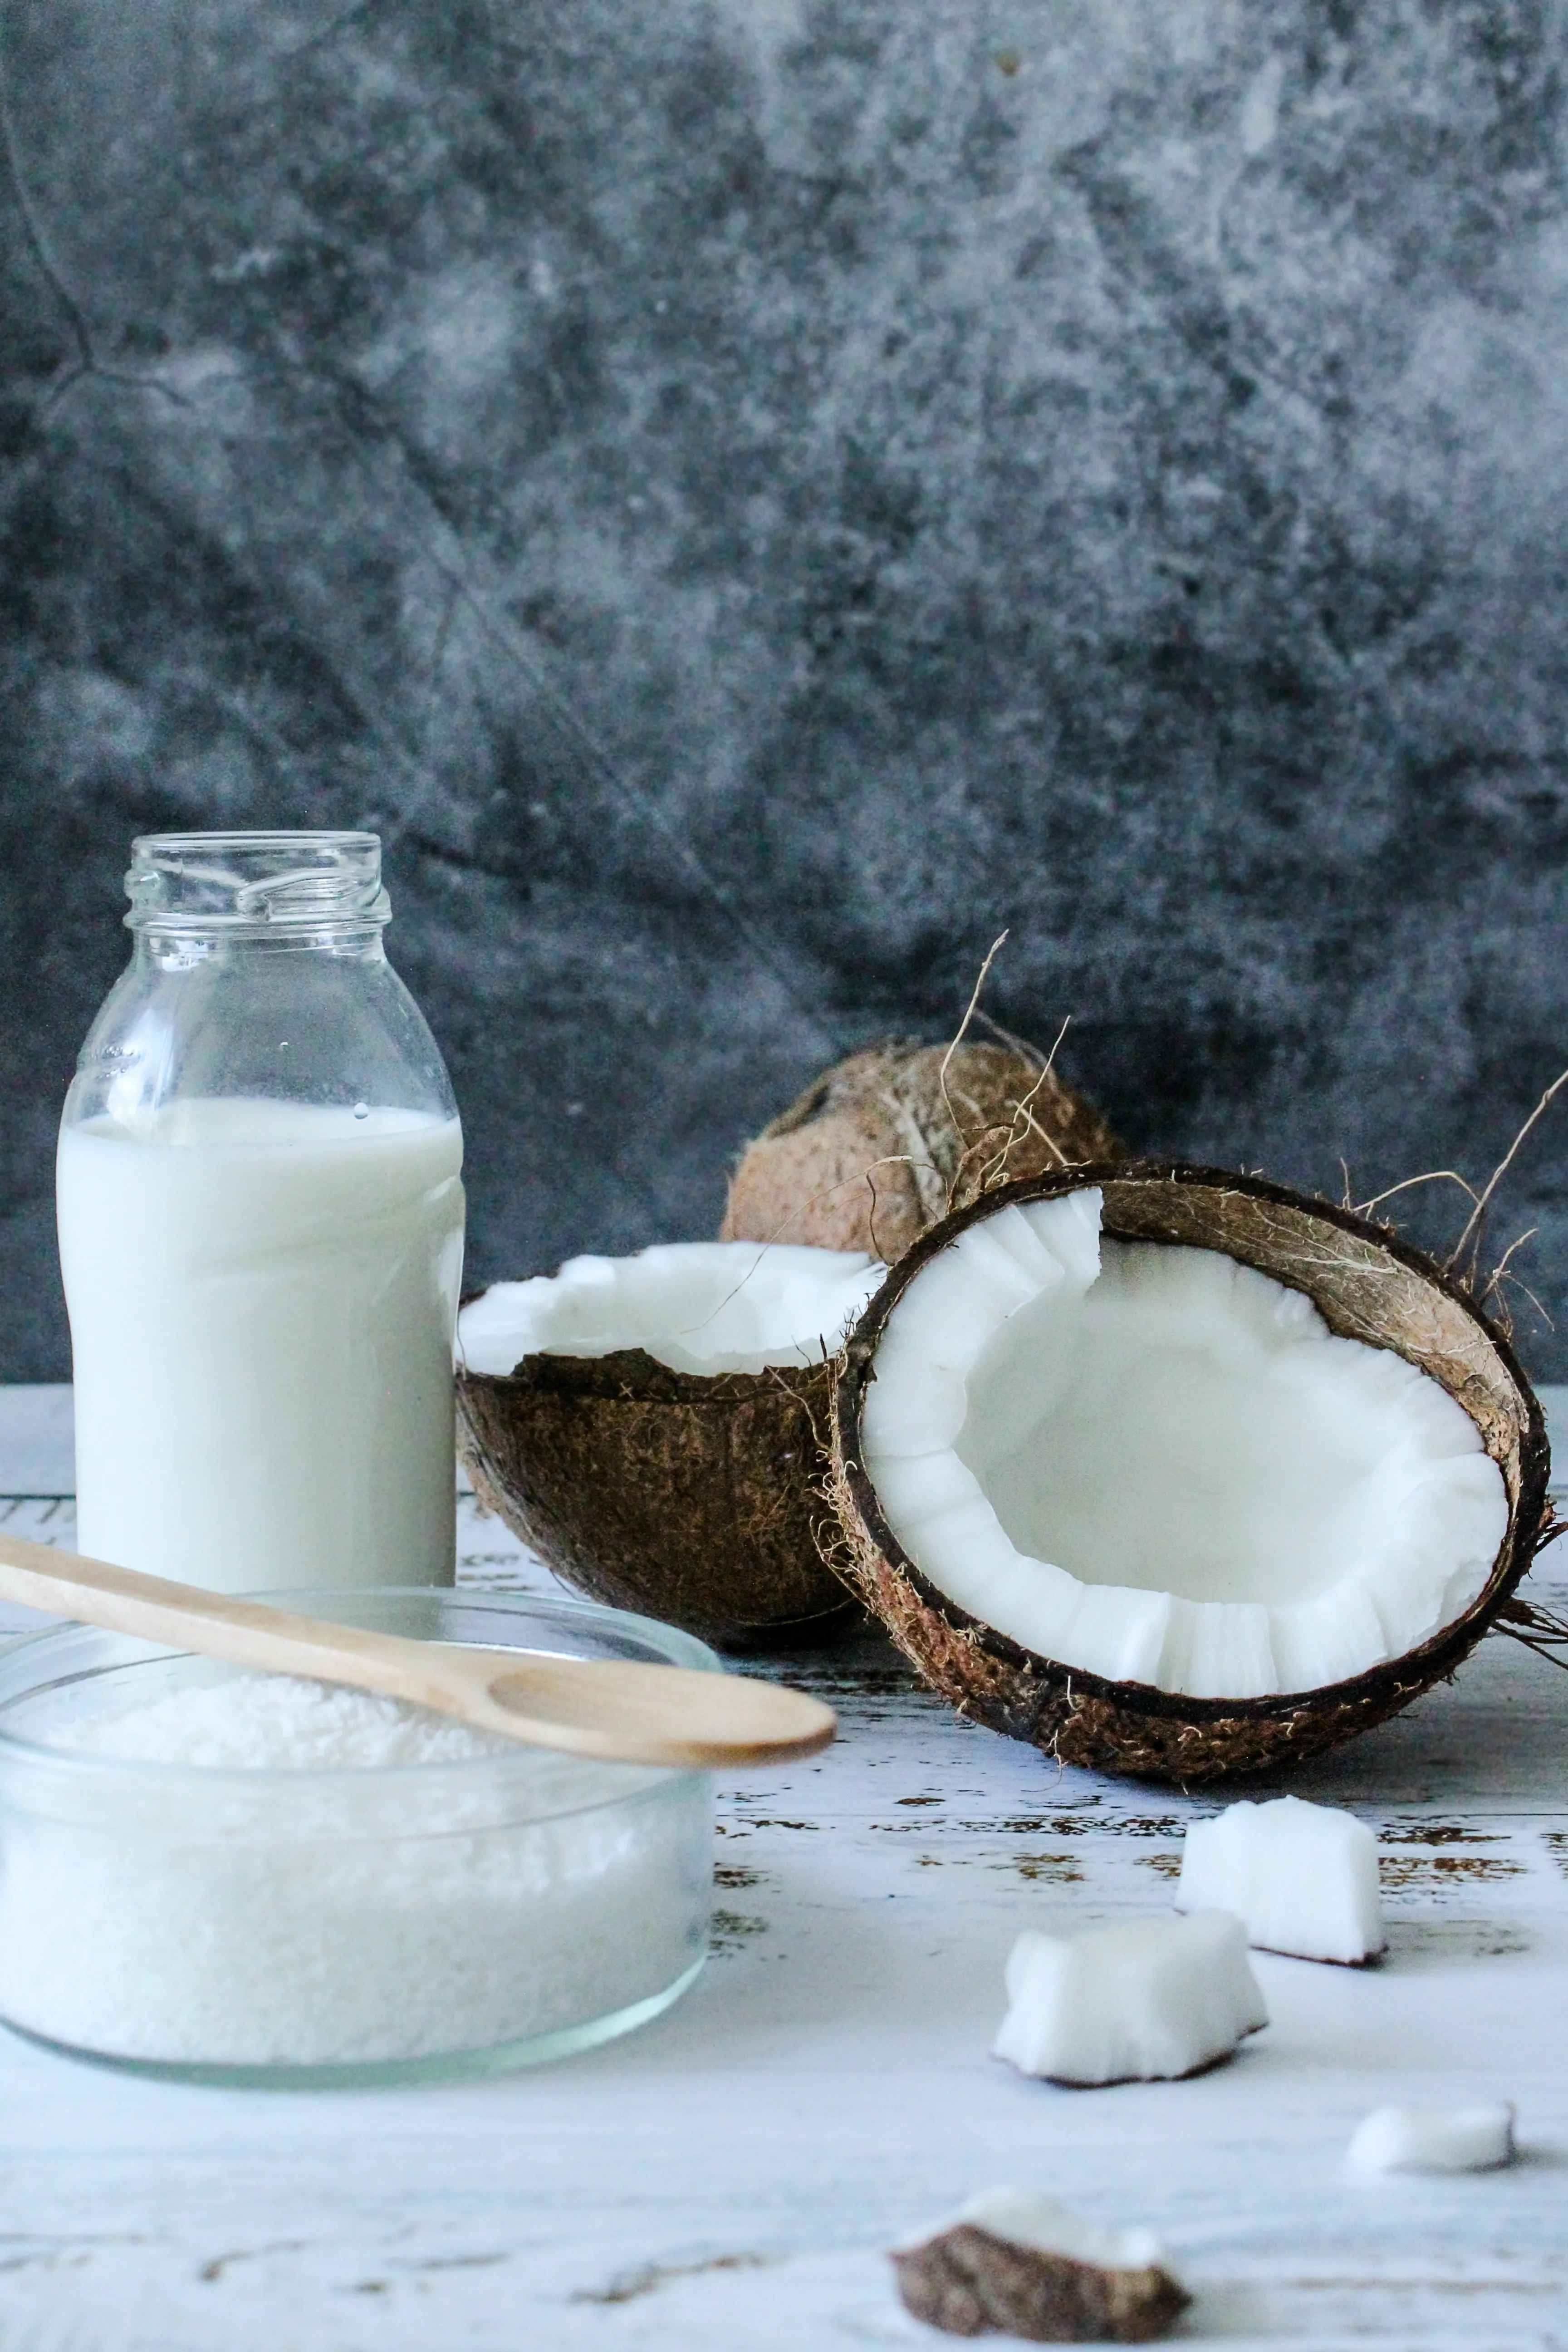 Coconut milk kept on a table in a bottle with some coconut pieces and grated coconut